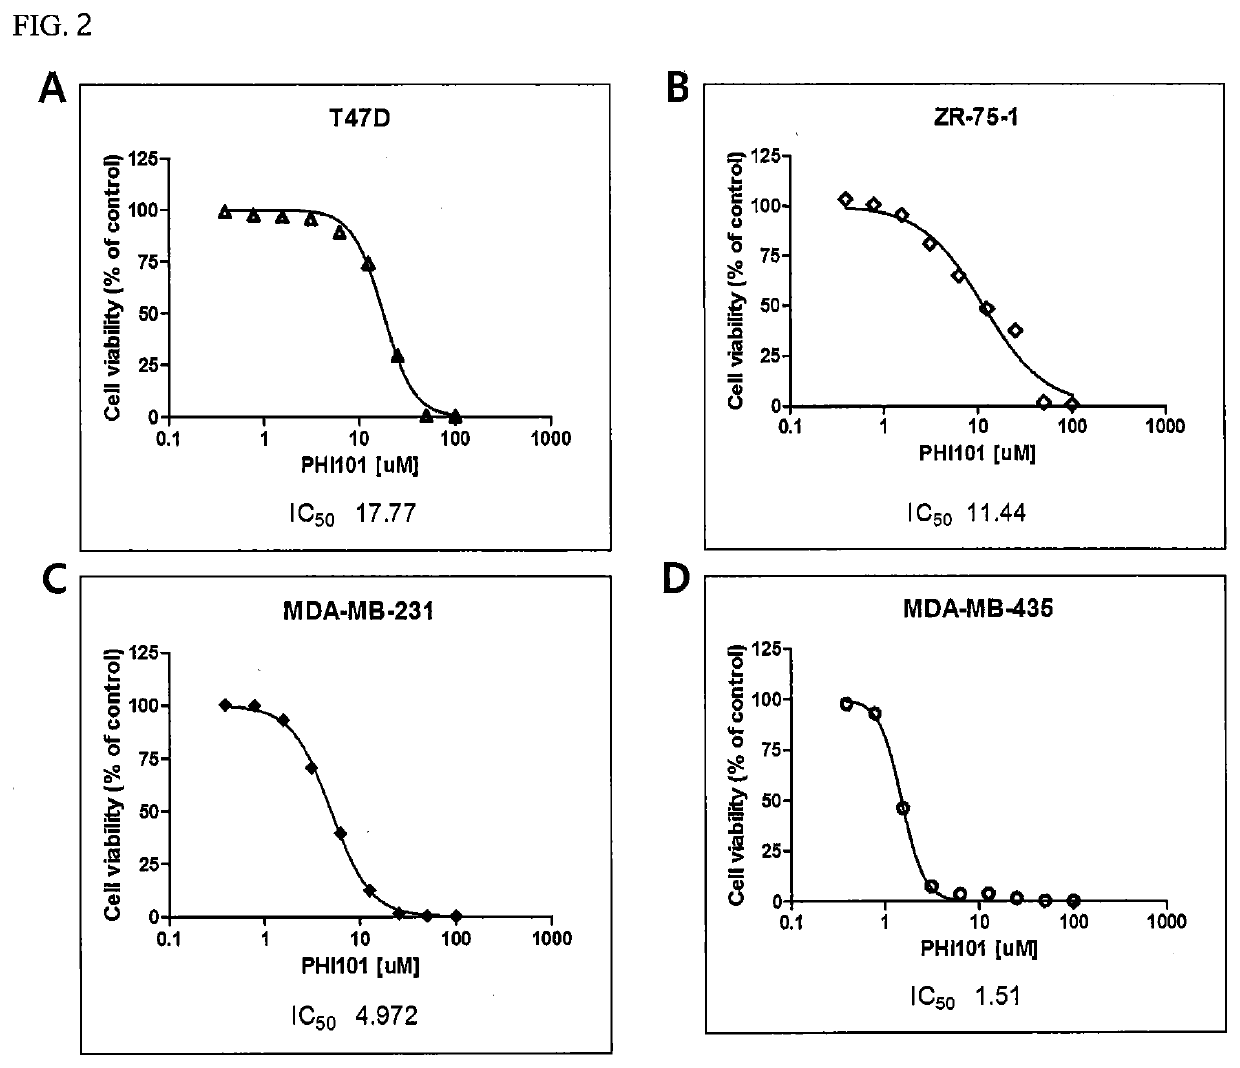 Use of 2,3,5-substituted thiophene compound to prevent, ameliorate, or treat breast cancers